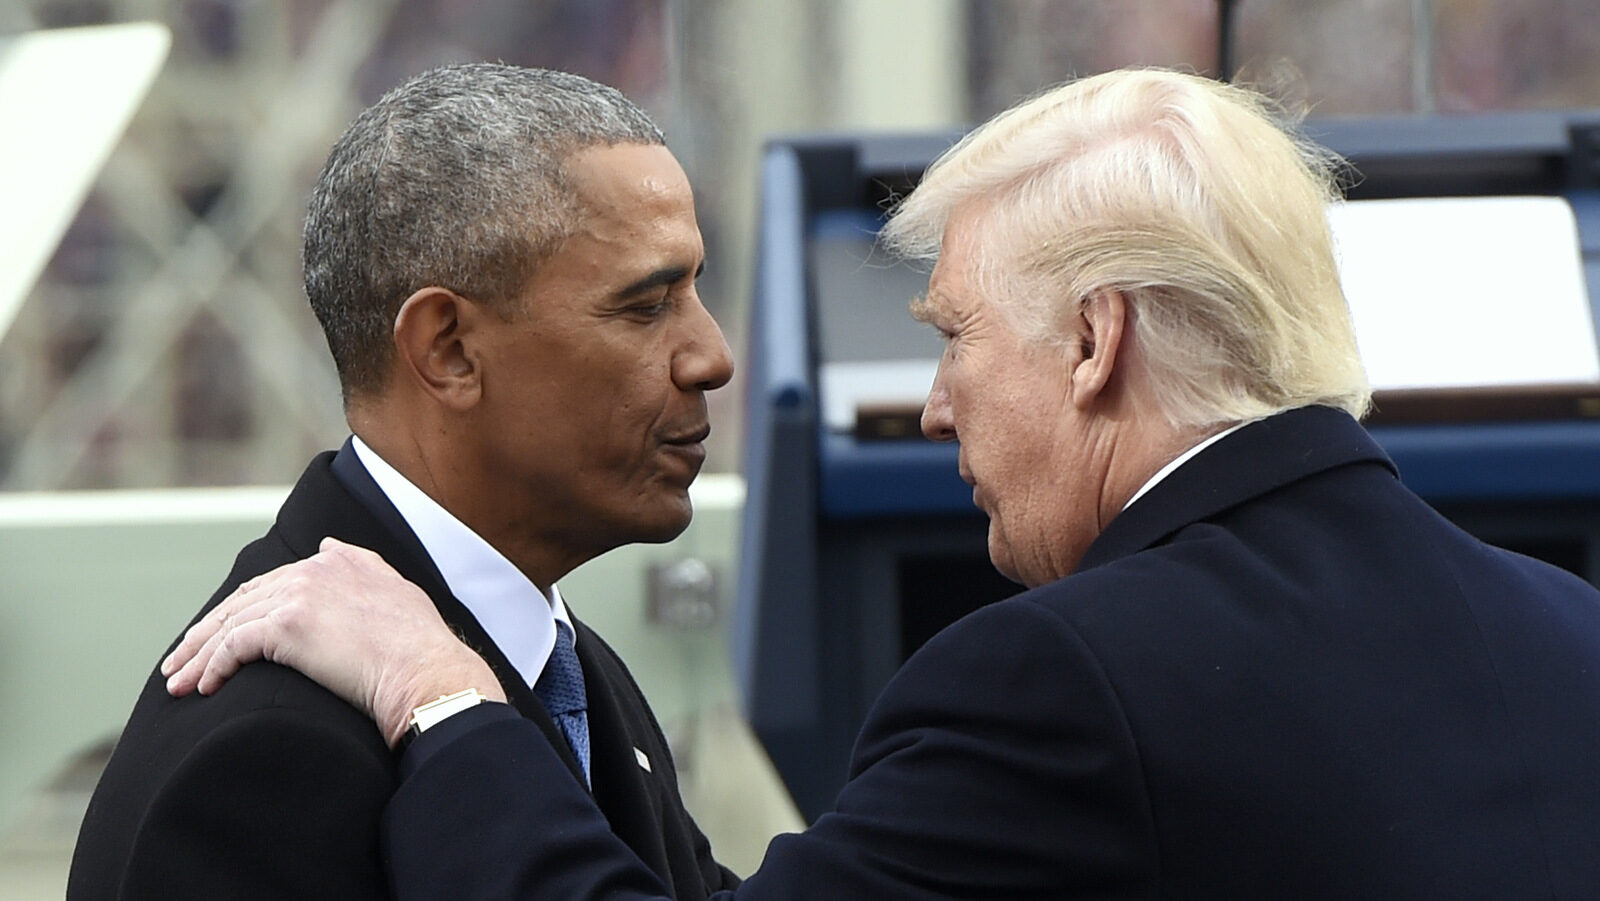 President Barack Obama speaks with President-elect Donald Trump during the presidential inauguration at the U.S. Capitol in Washington, Friday, Jan 20, 2017. (Saul Loeb/AP)